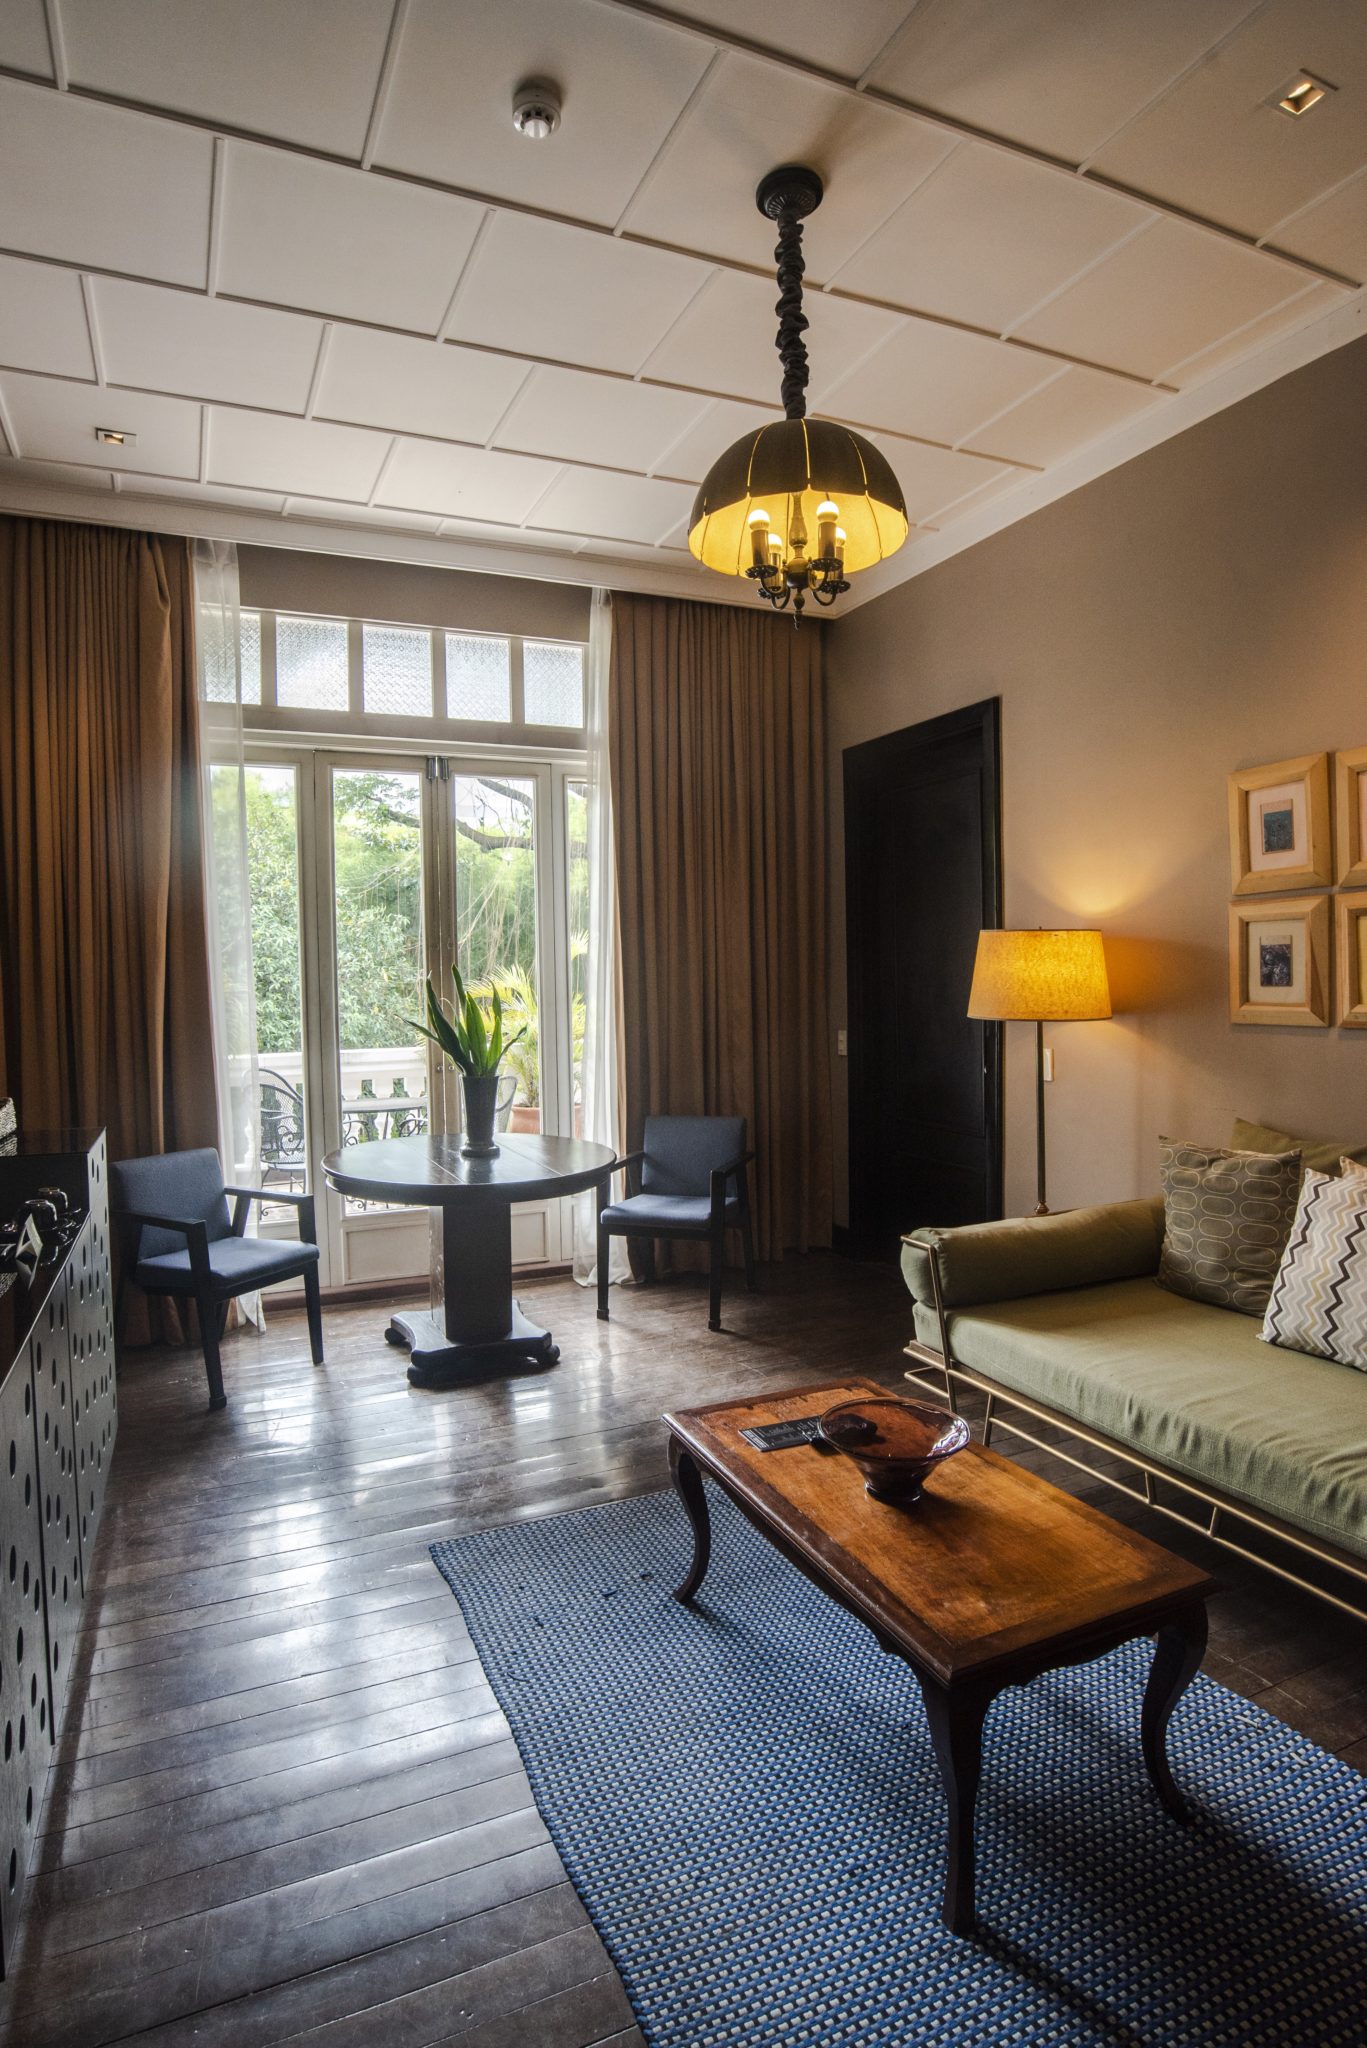 One of the suites in Henry Hotel showcases the power of adaptive reuse and conservation